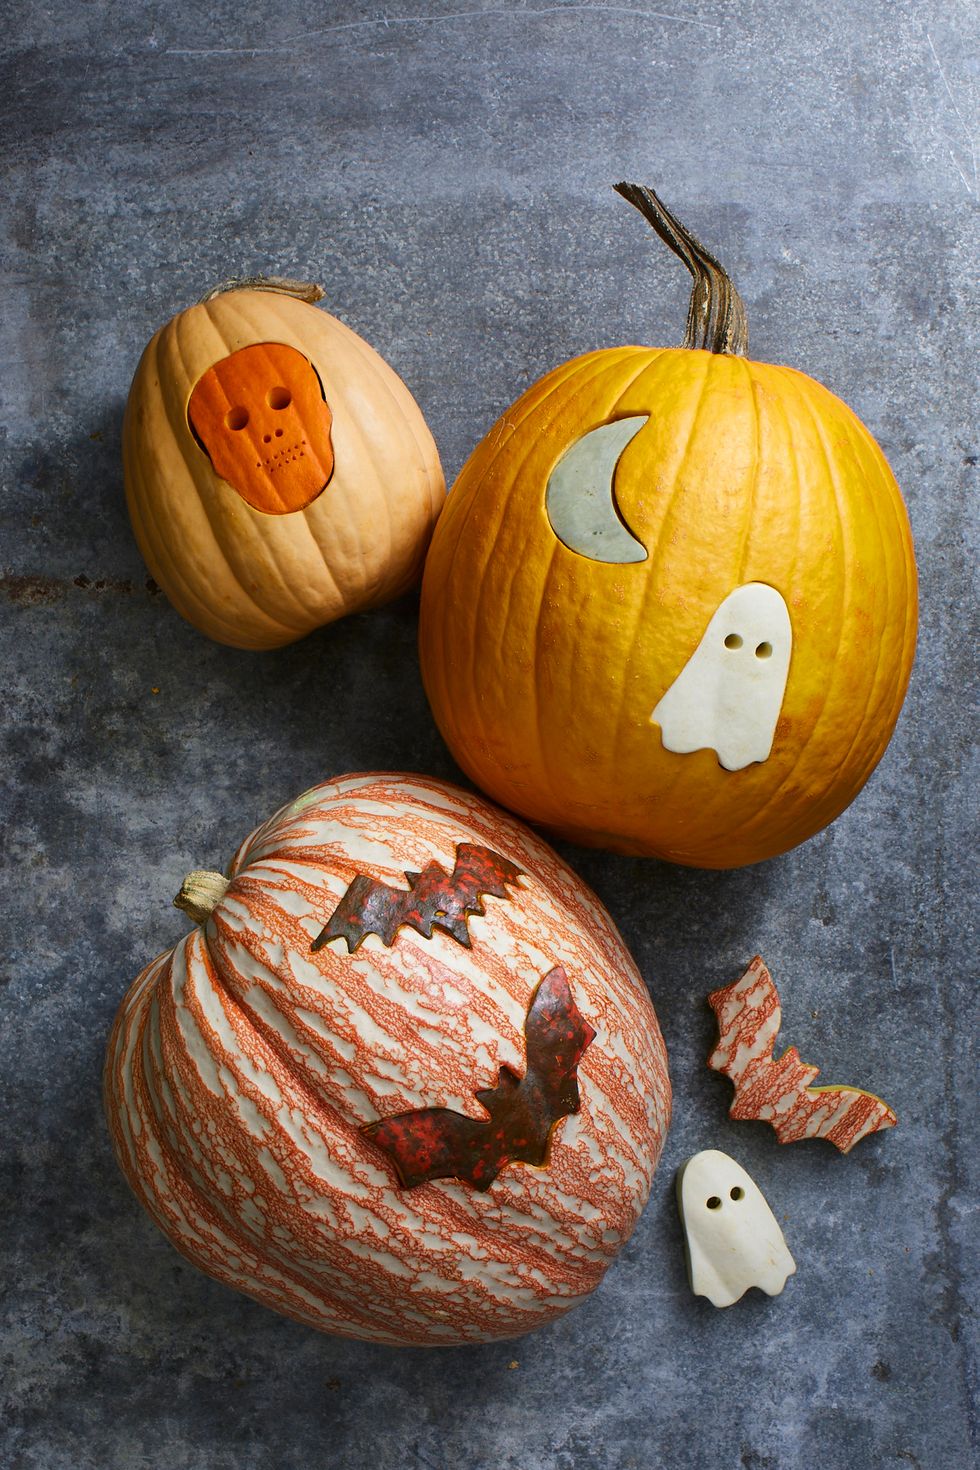 pumpkin carving ideas, three pumpkins with different shapes punched into them, like ghosts, bats and skeletons